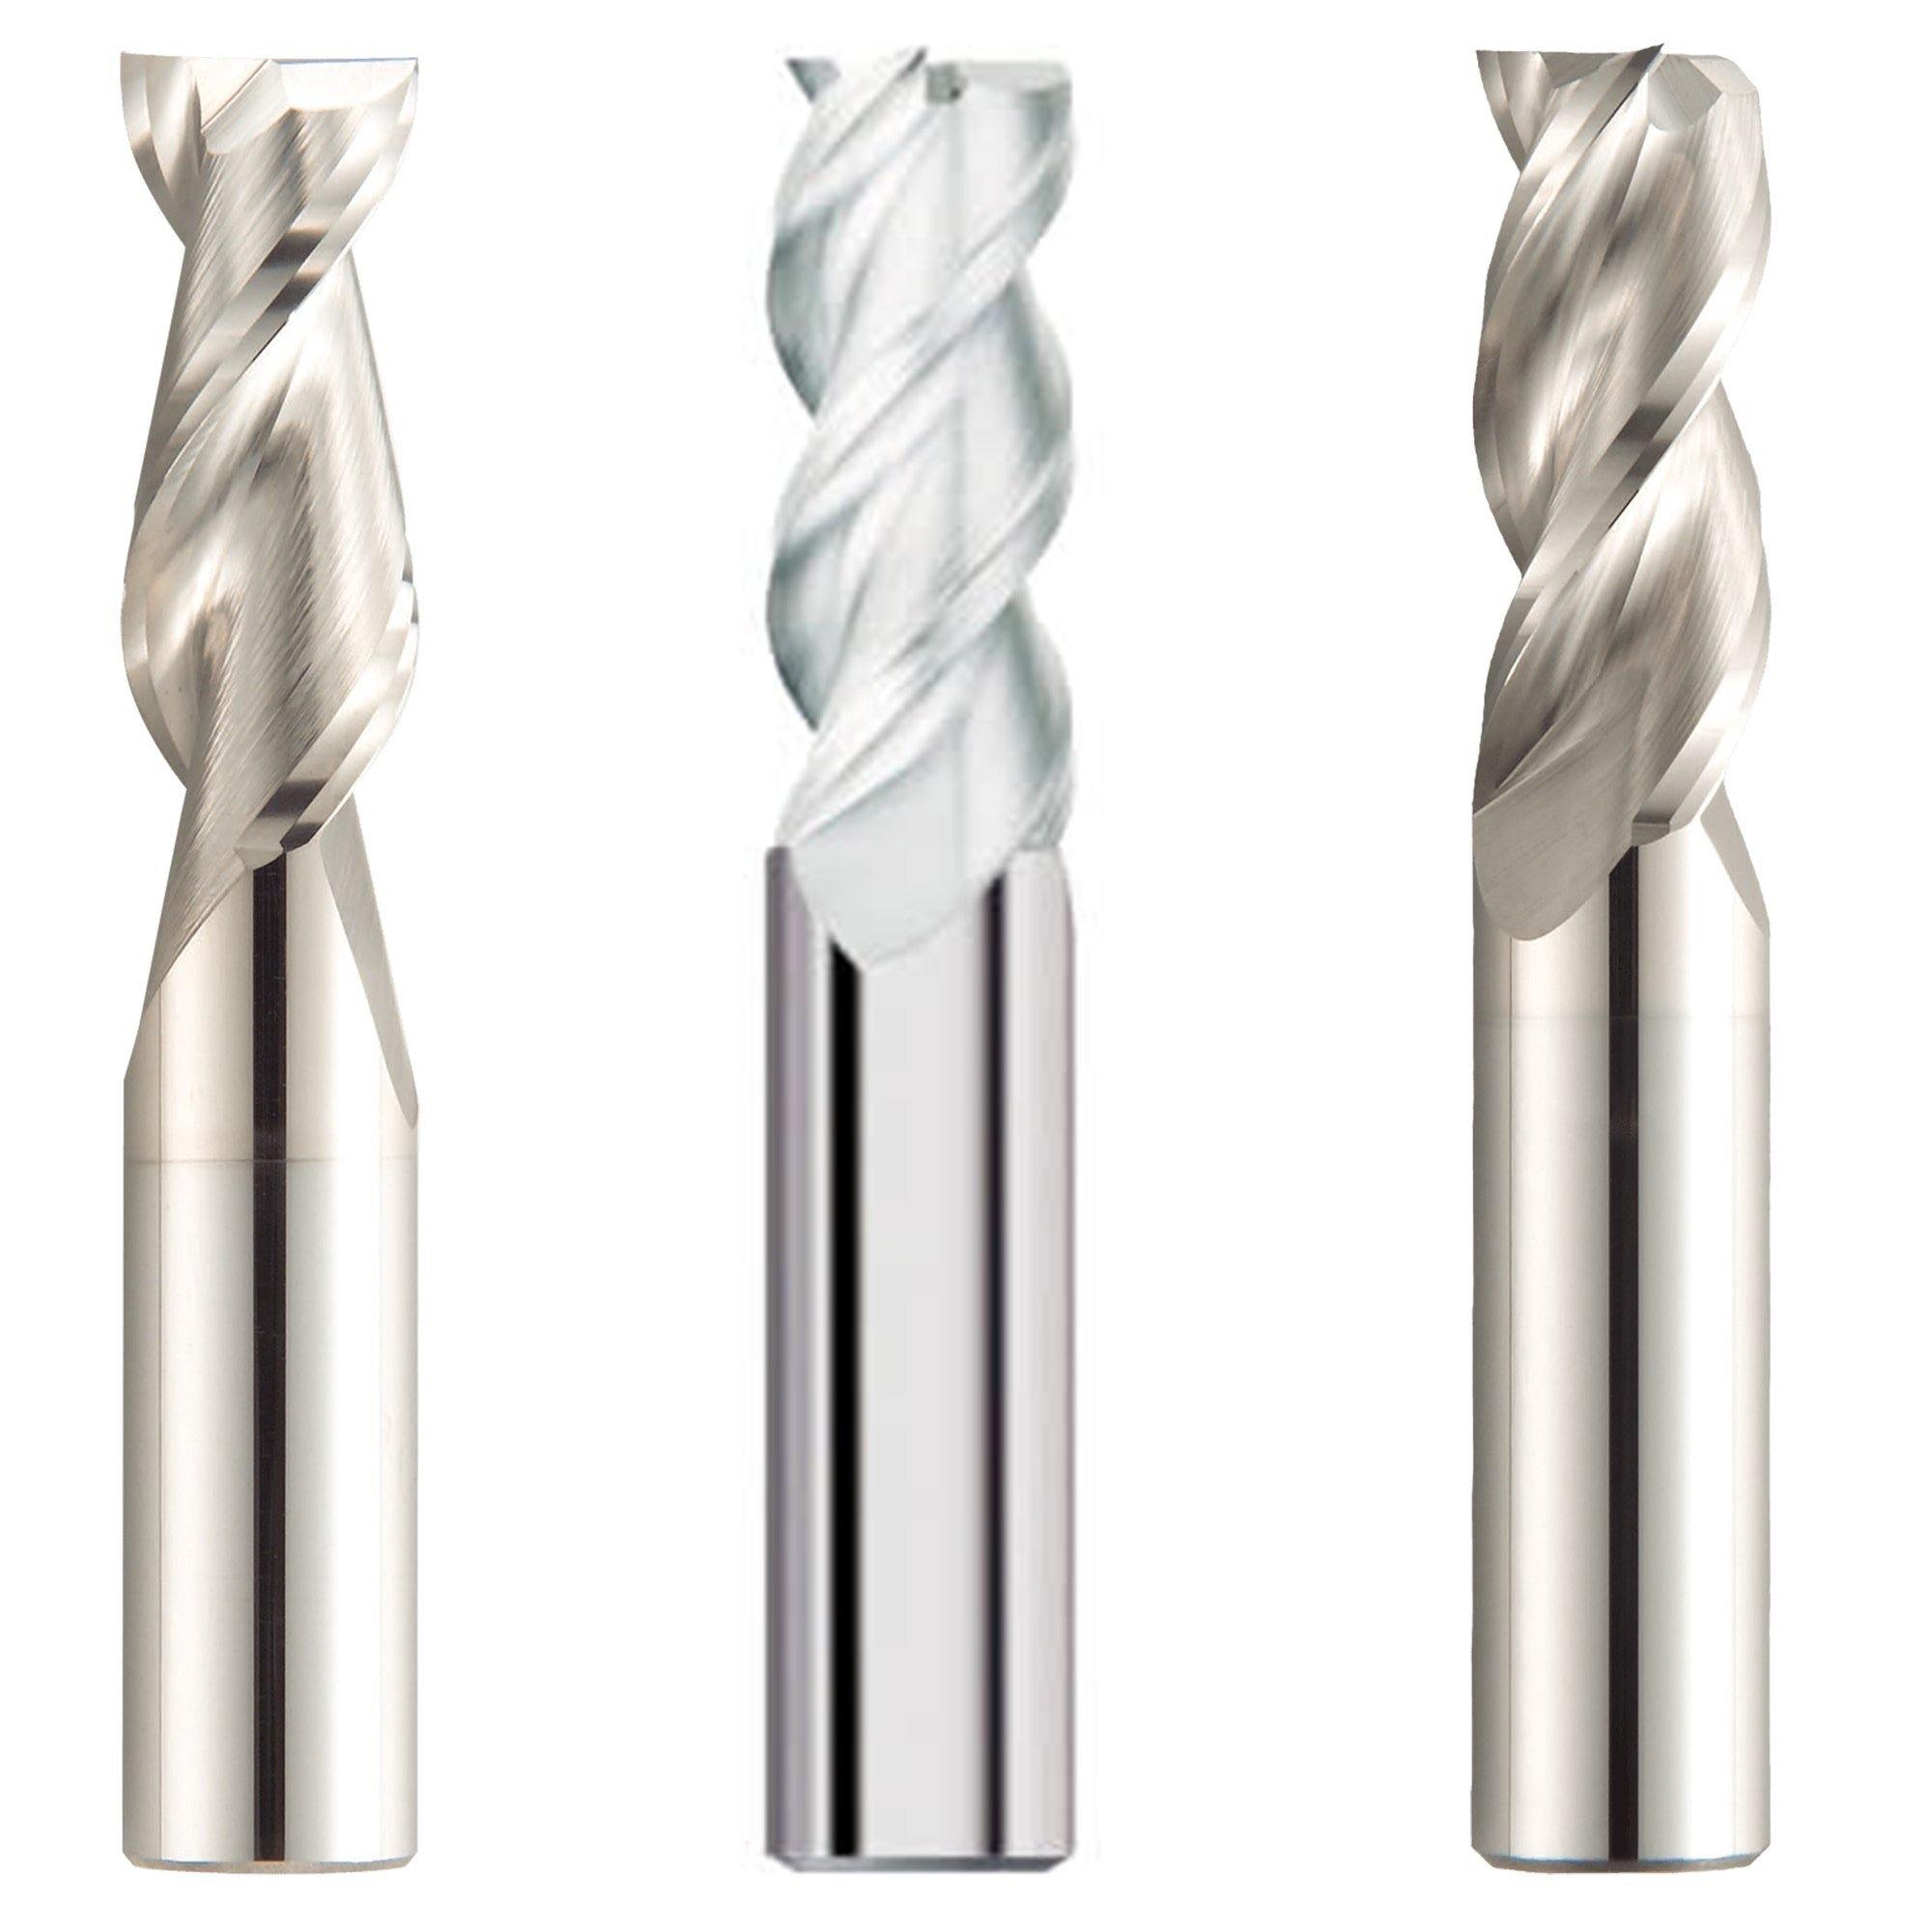 (3 Pack) 5/8" x 3" x 6" Aluminum HP Carbide End Mills - The End Mill Store 